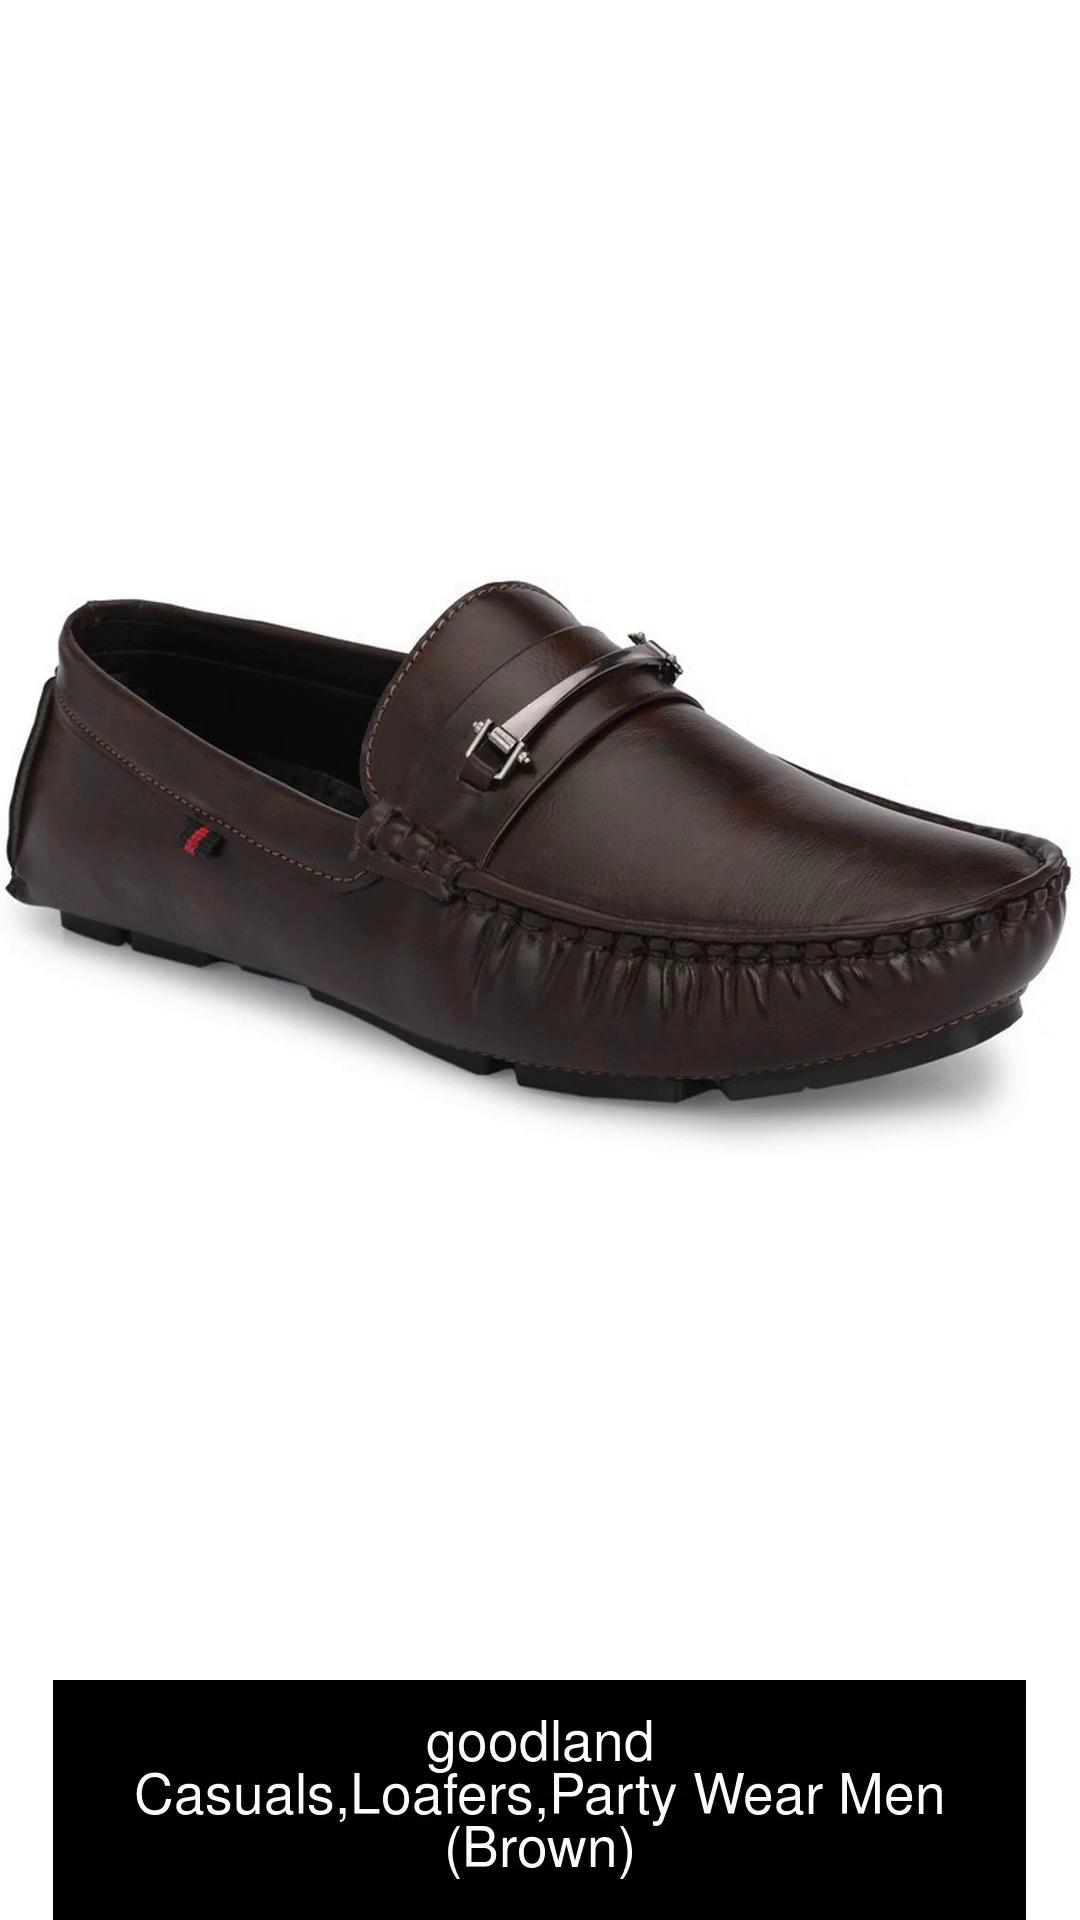 goodland Men driving shoes formal partywear officewear shoes Loafers  For Men  Buy goodland Men driving shoes formal partywear officewear  shoes Loafers For Men Online at Best Price  Shop Online for